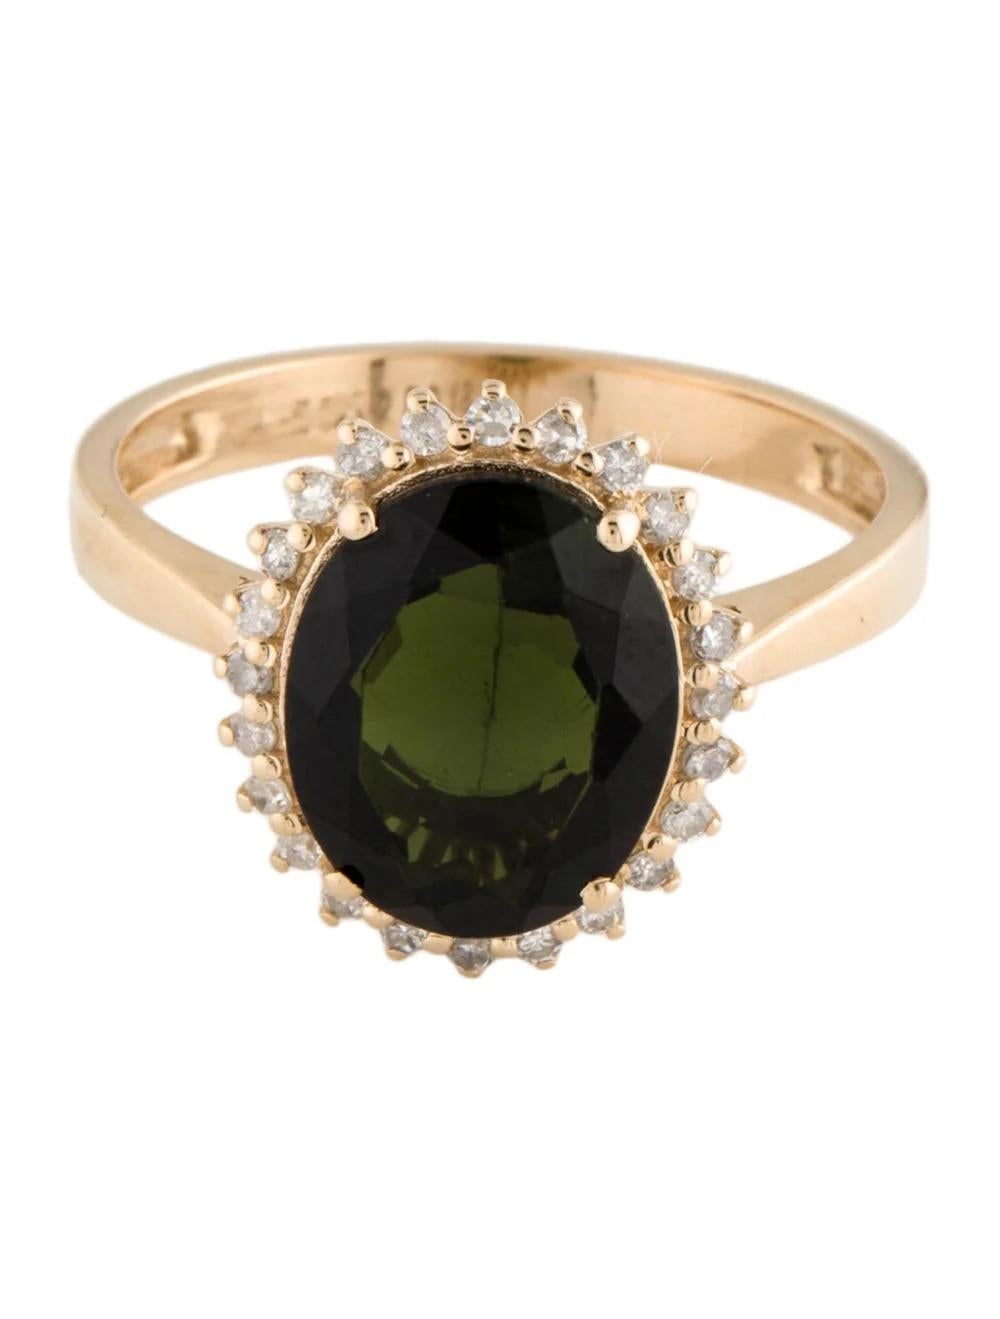 Oval Cut 14K 3.42ctw Tourmaline Diamond Cocktail Ring Size 7.25 Yellow Gold Vintage For Sale